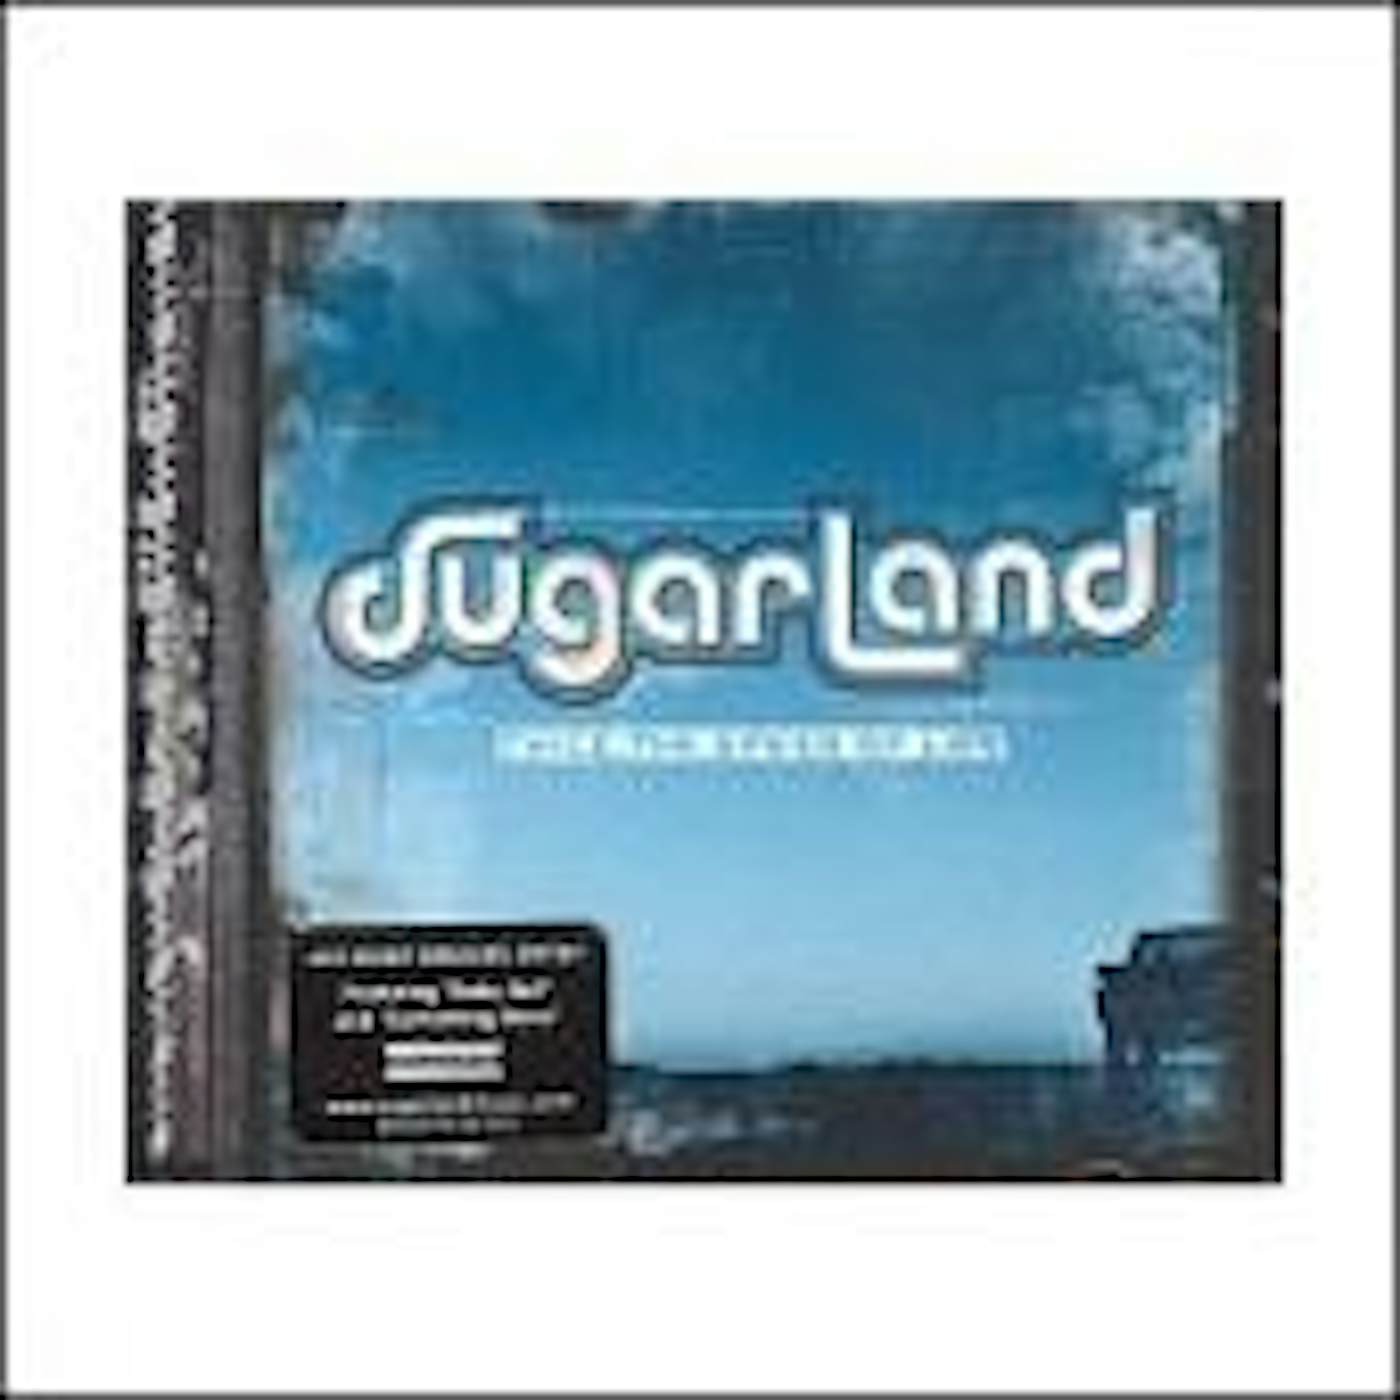 Sugarland CD - Twice the Speed of Life